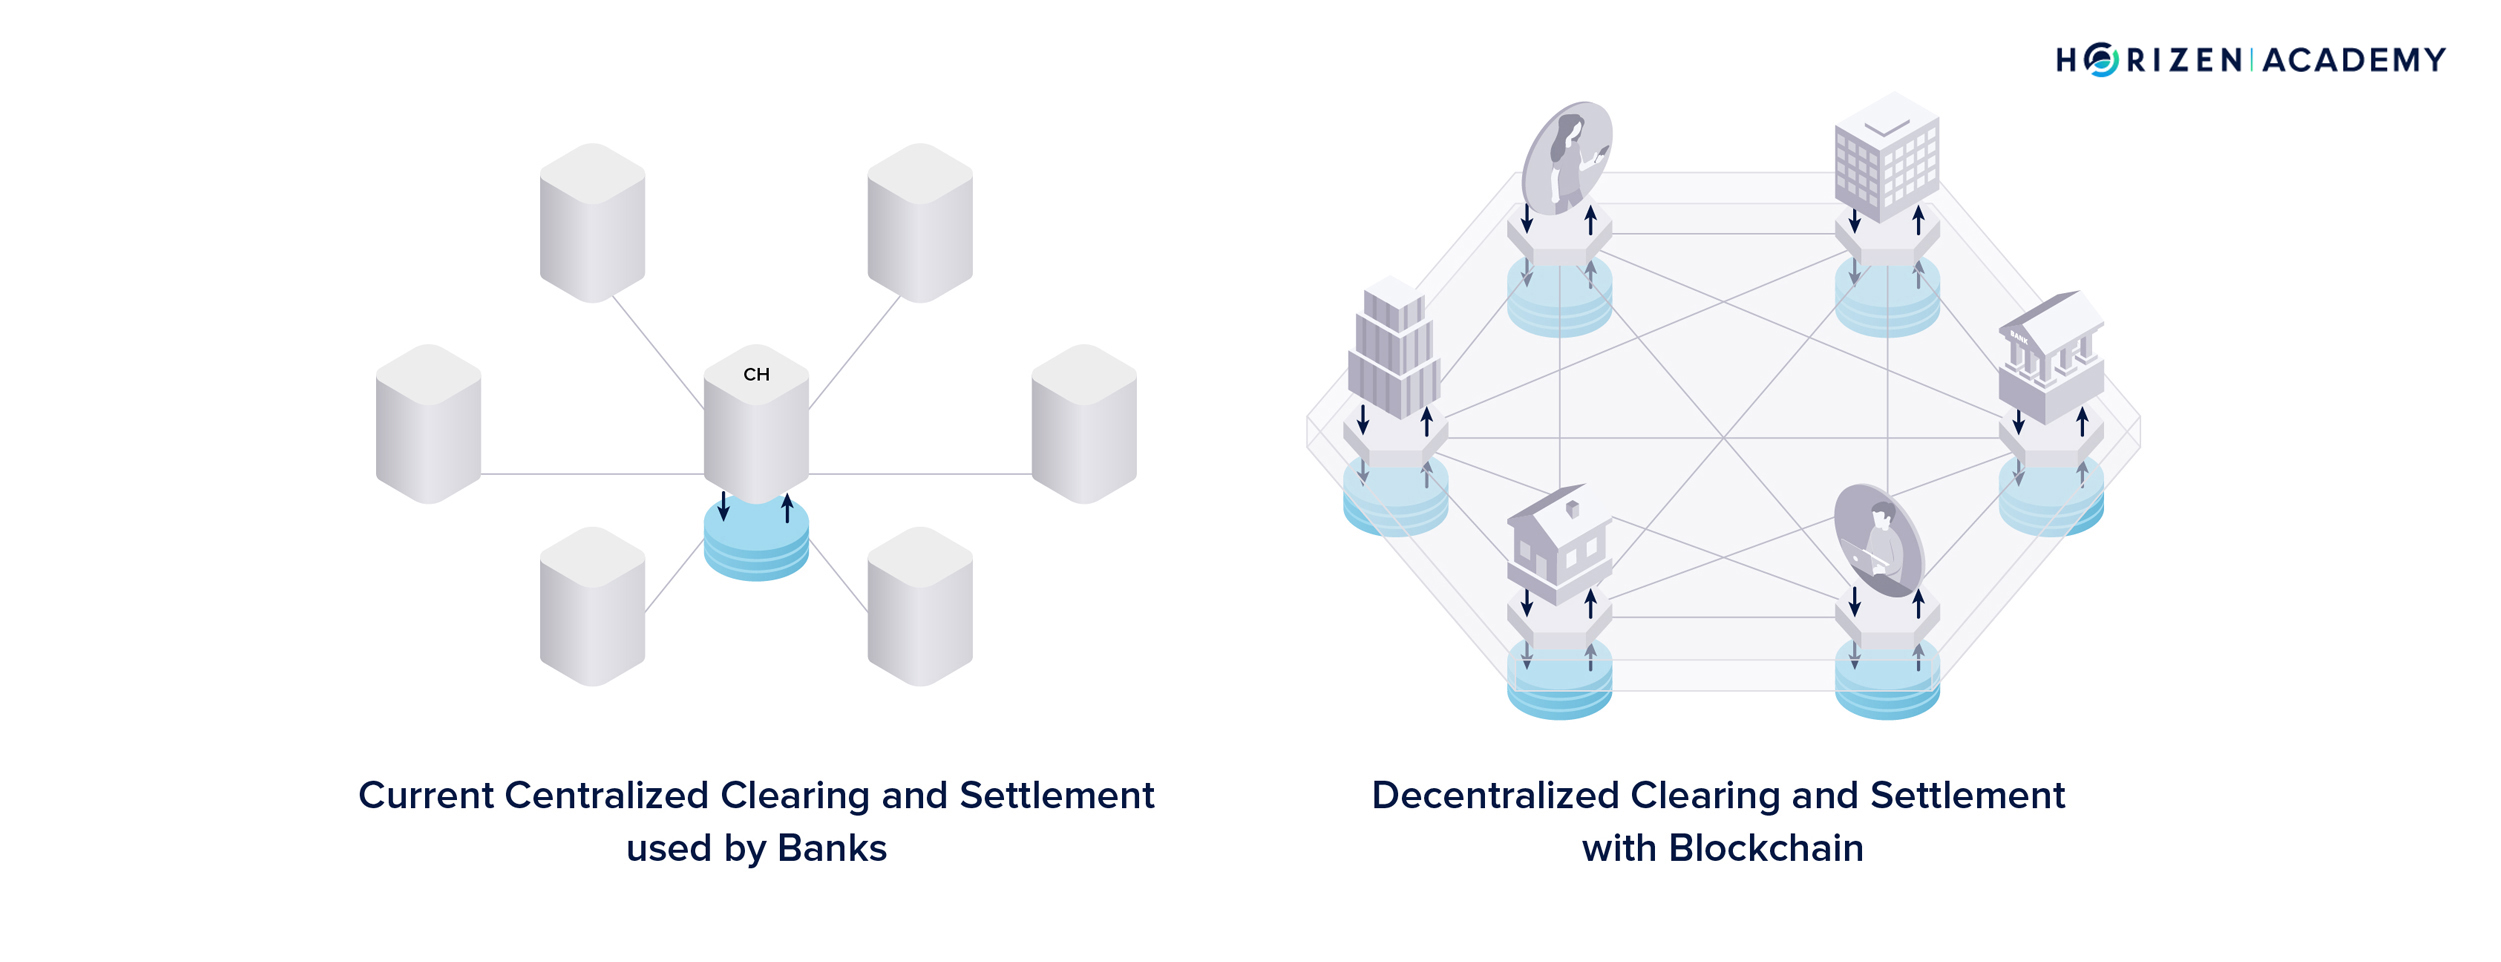 Decentralised clearing